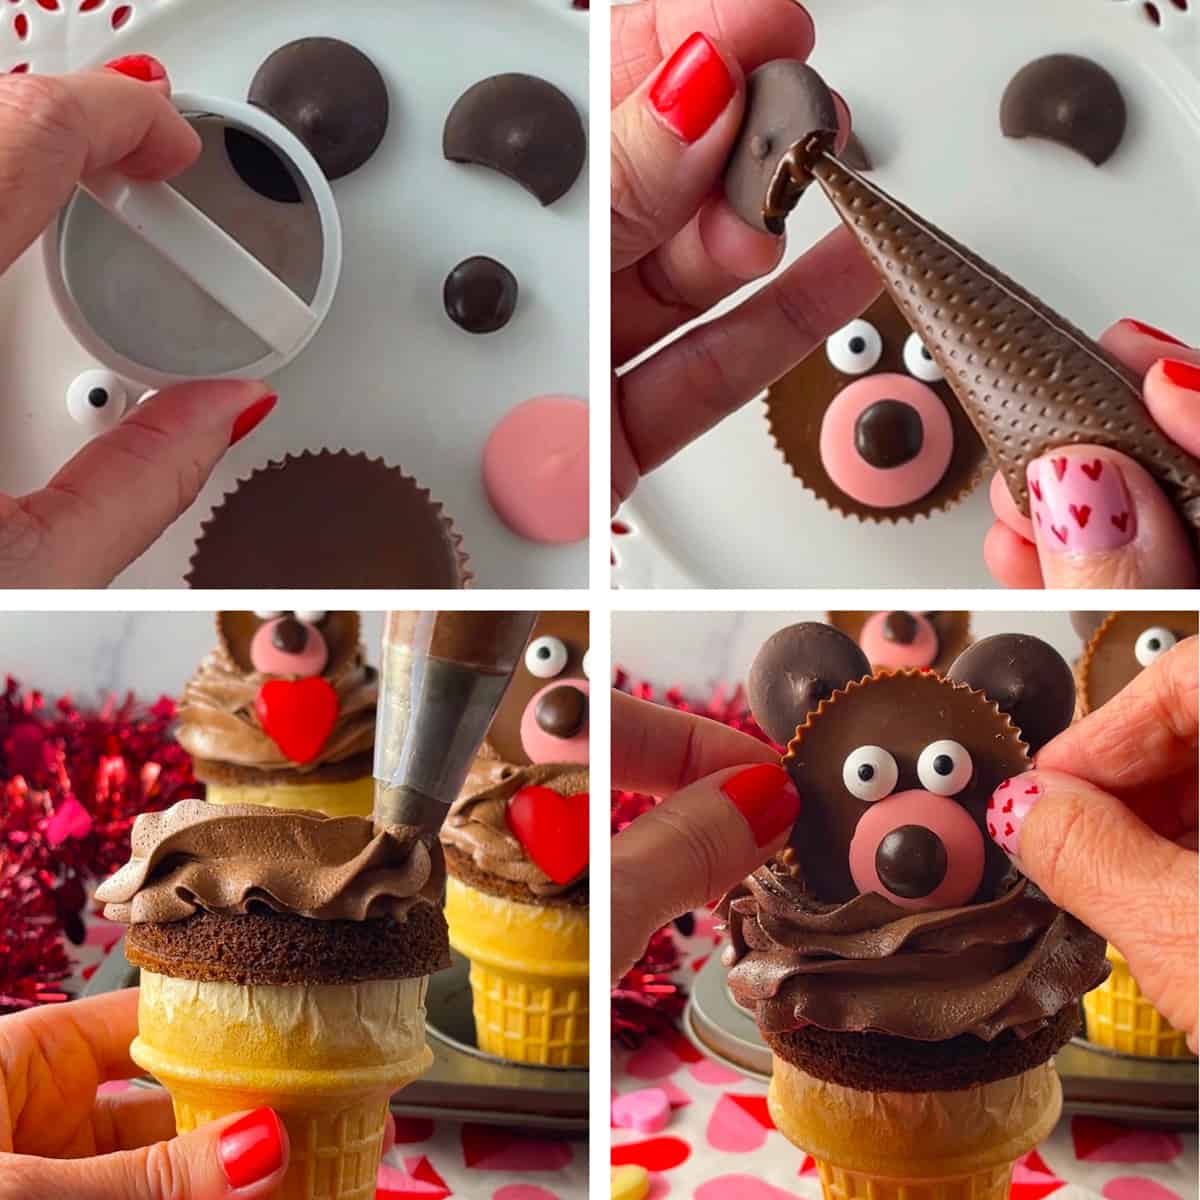 How to make a candy teddy bear using Reese's cups and candy melts plus candy eyes.